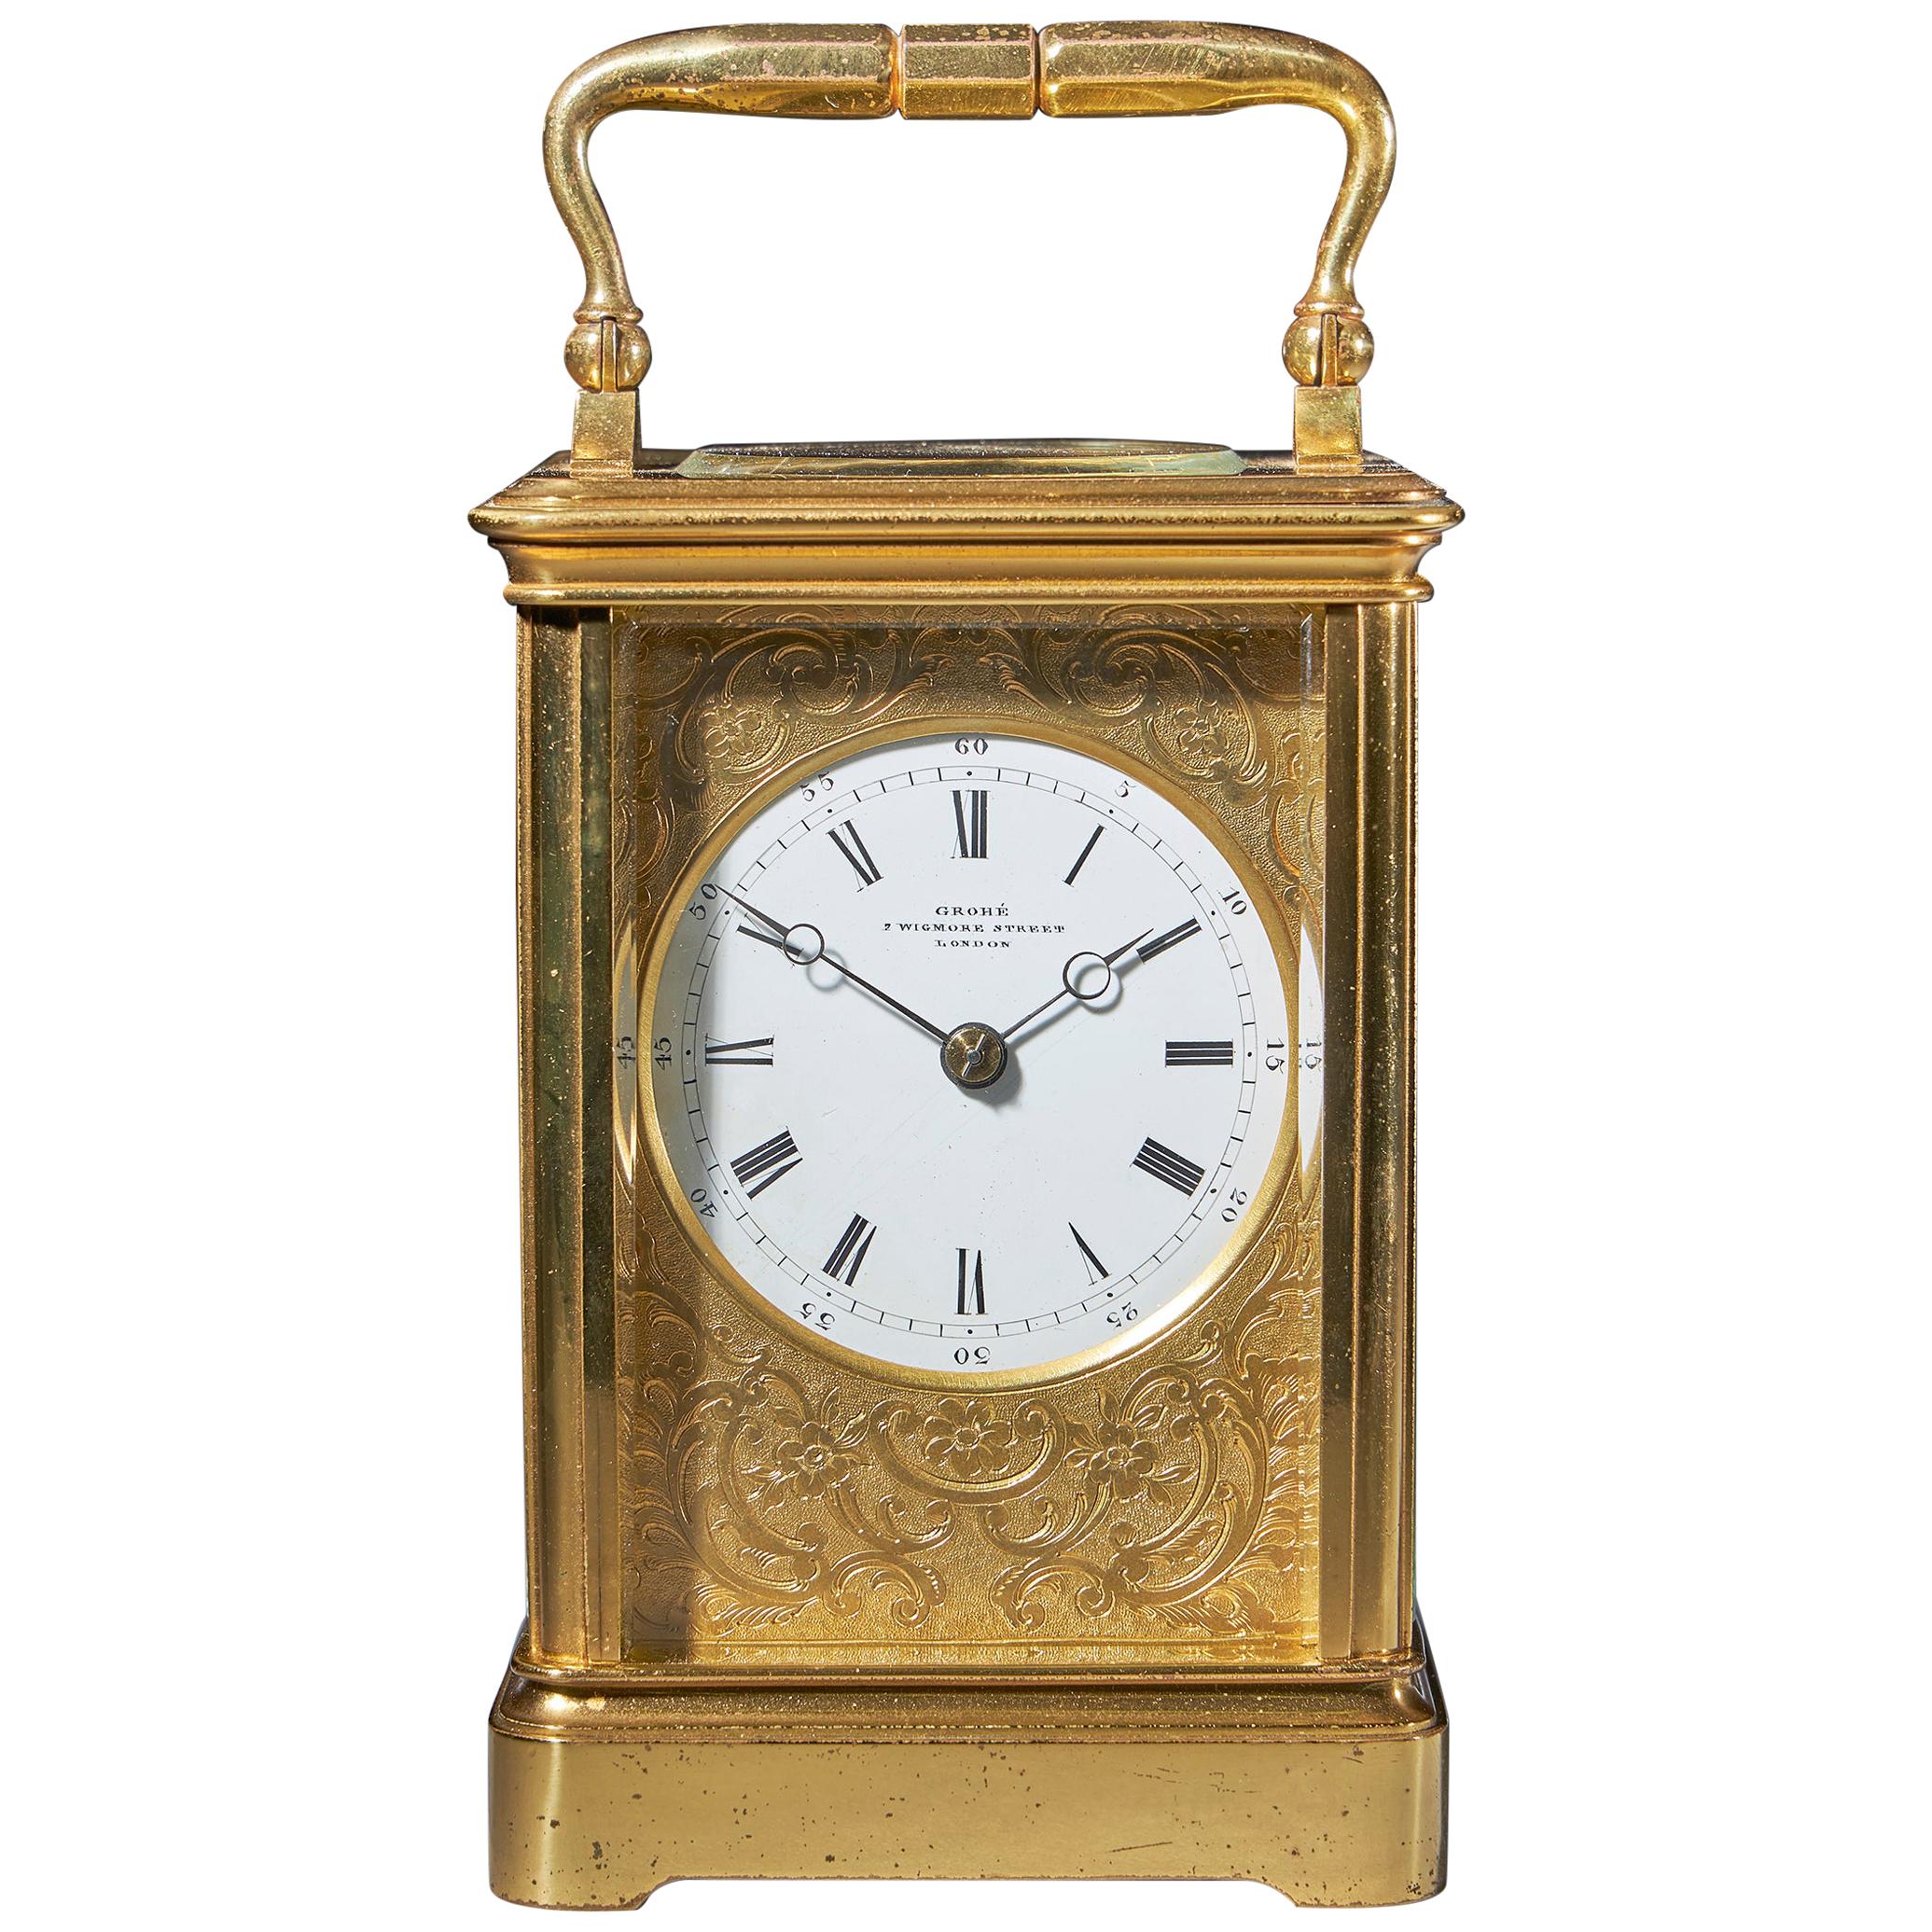 Striking 19th Century Carriage Clock with a Gilt-Brass Corniche Case by Grohé